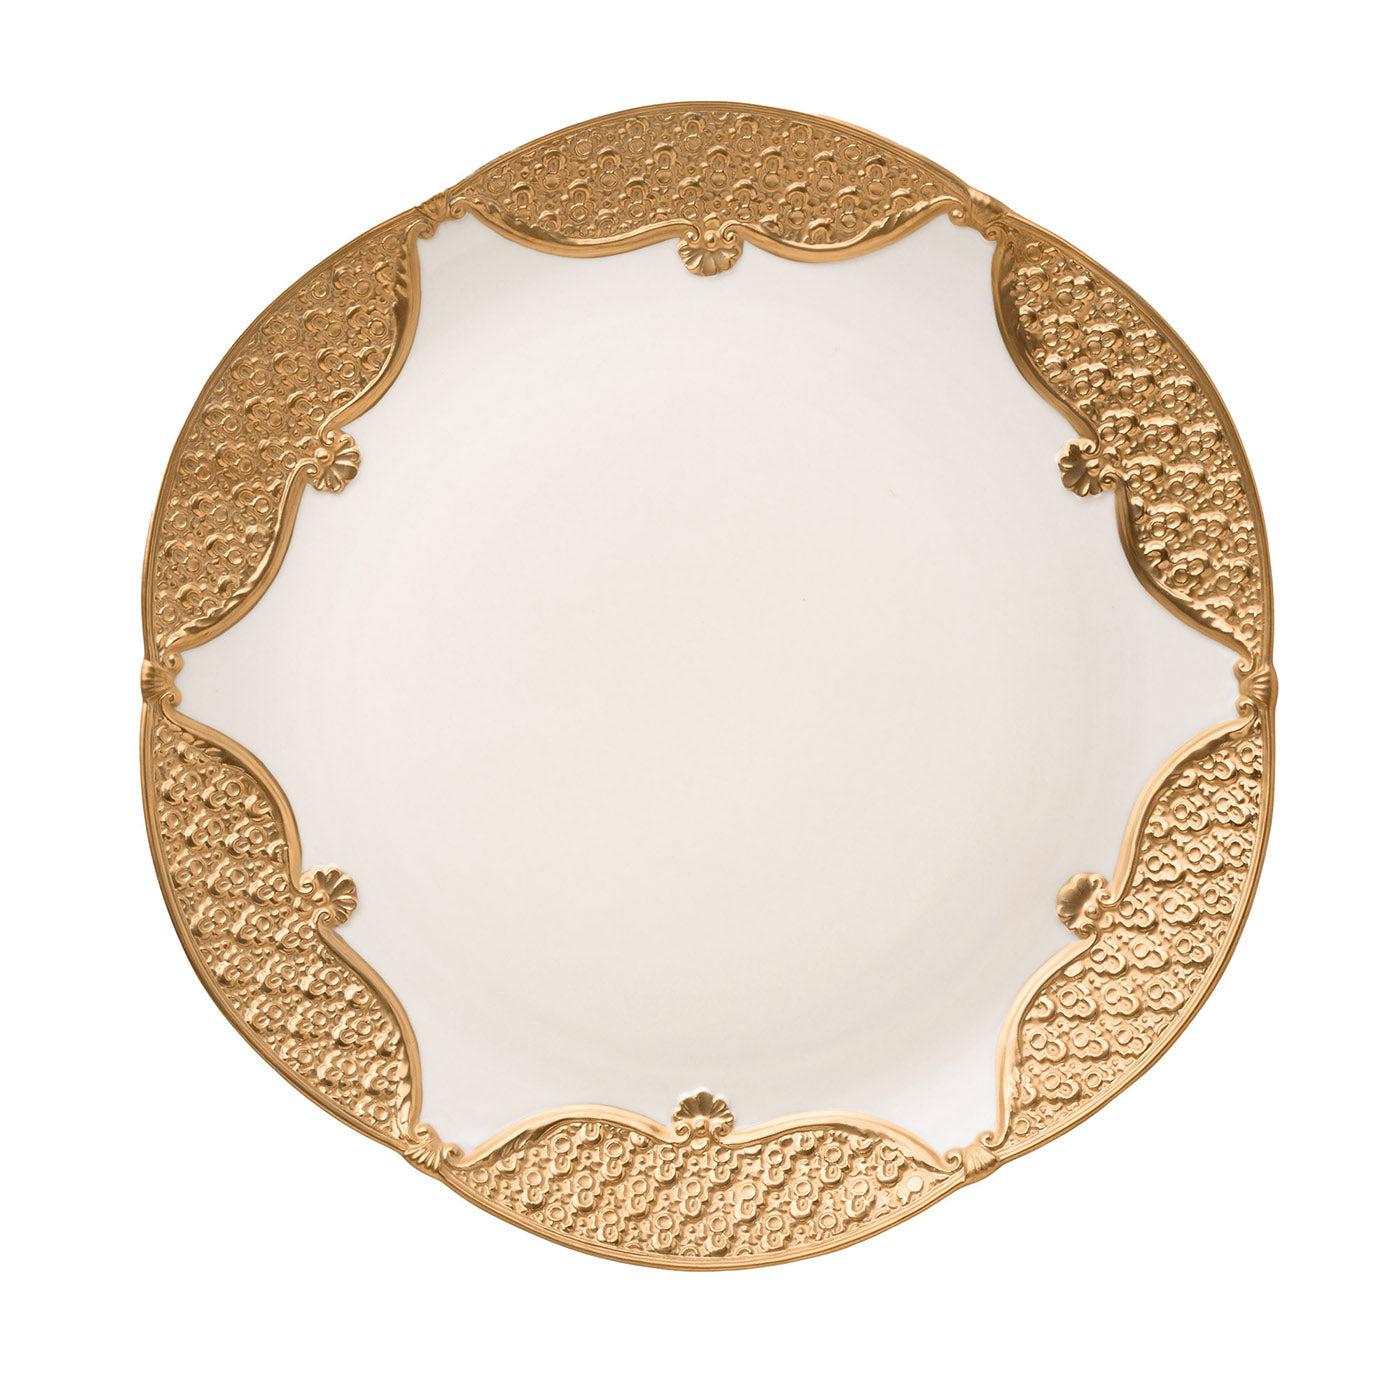 Caterina Set of 2 White & Gold Dinner Plates - Main view